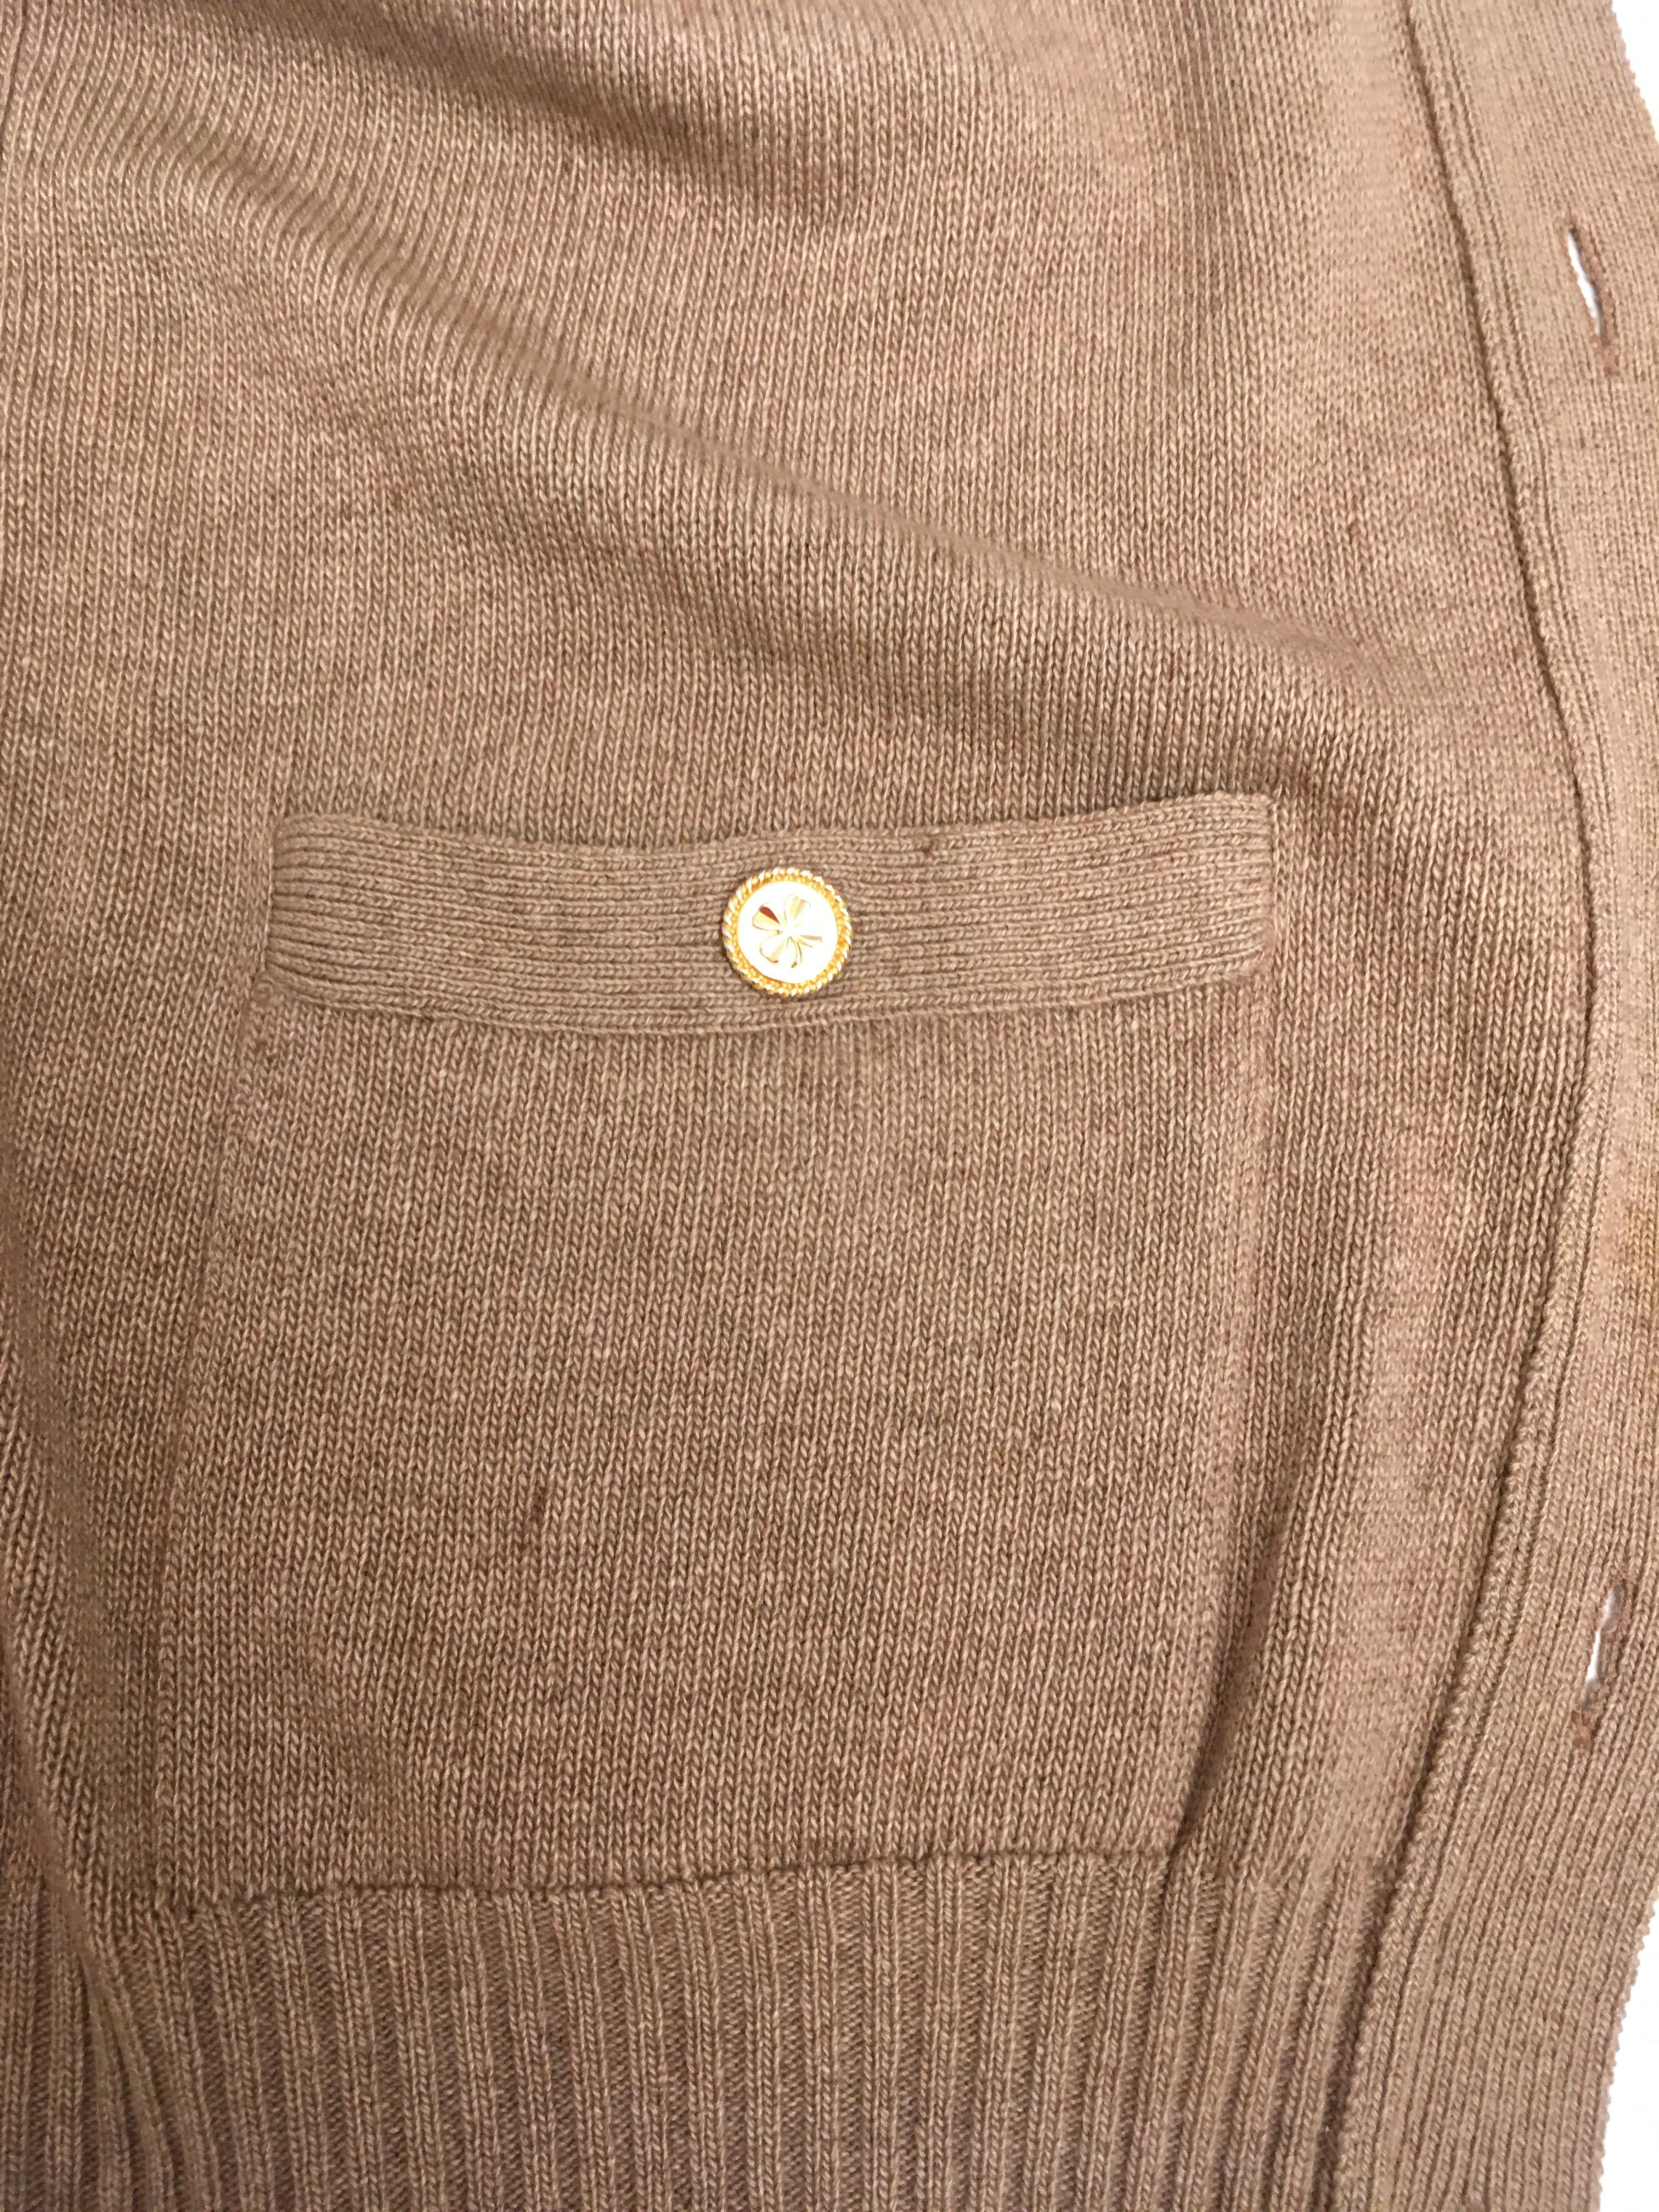 Vintage Chanel Cardigan Sweater... Cashmere Timeless Classic For Sale 2